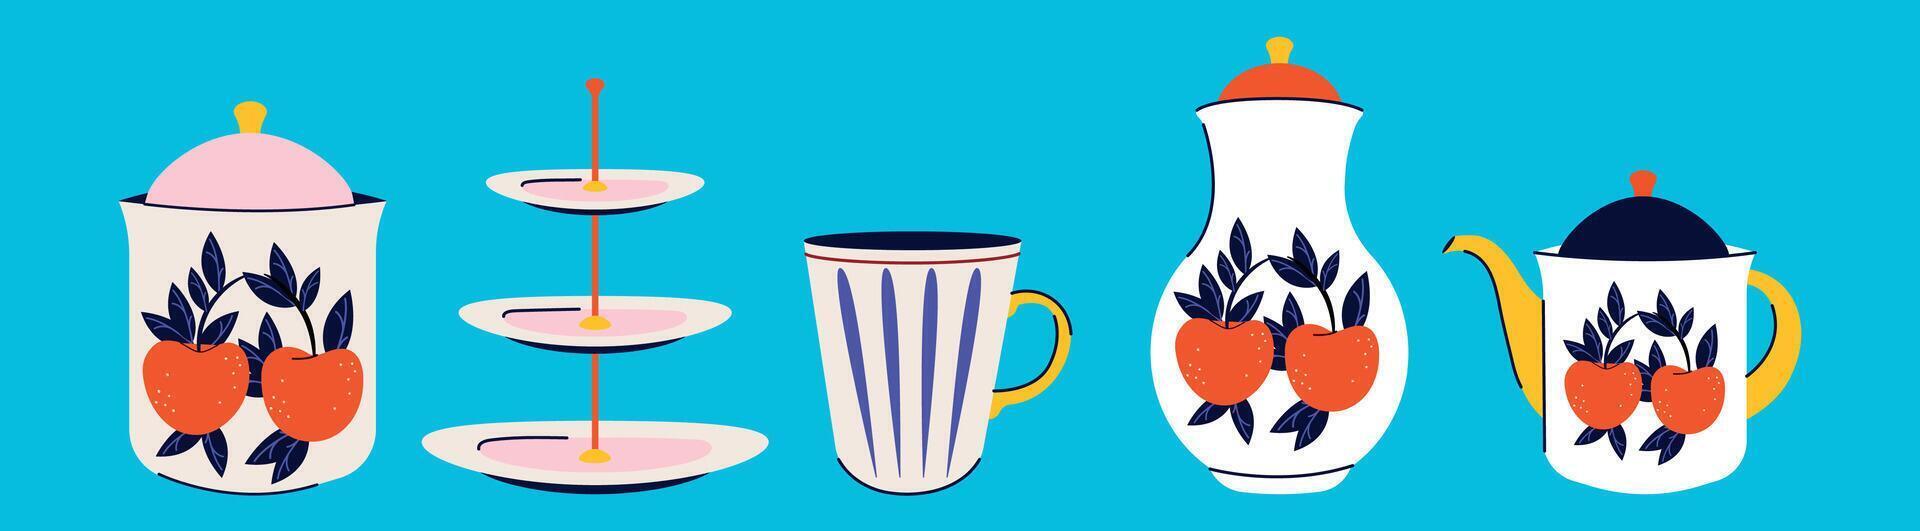 Set of dishes in hand drawn, modern trendy style. Groovy design. Cups, teapot, kettle for drinks, tea, coffee. Vector illustration. Vibrant colors. Flowers, berries, fruits. Elements. Flat style.